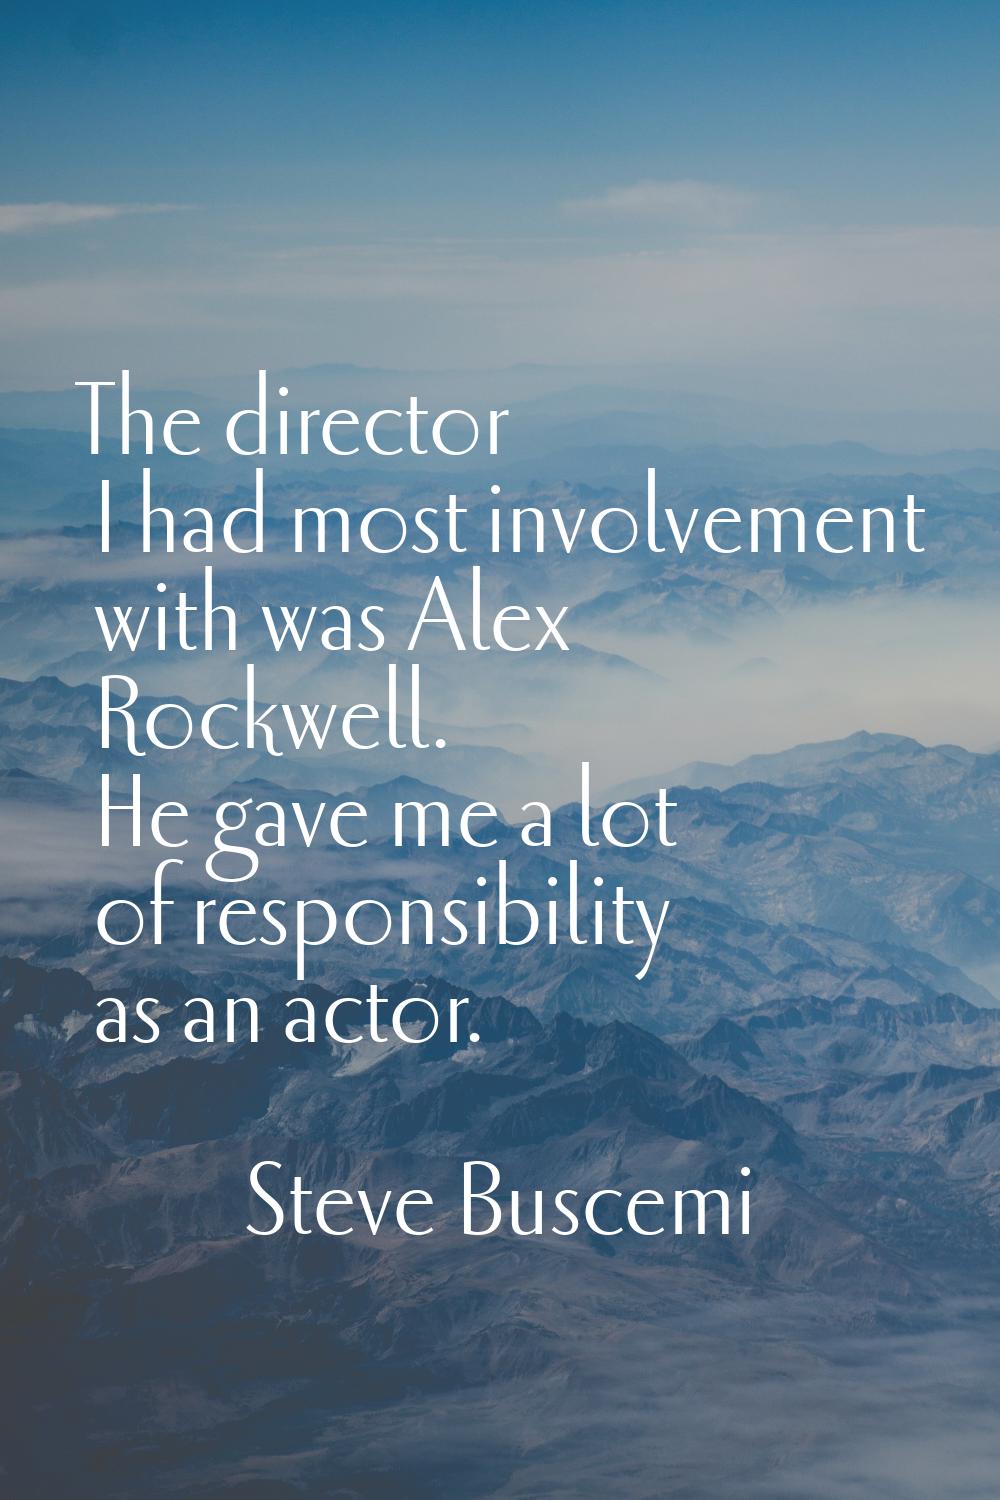 The director I had most involvement with was Alex Rockwell. He gave me a lot of responsibility as a